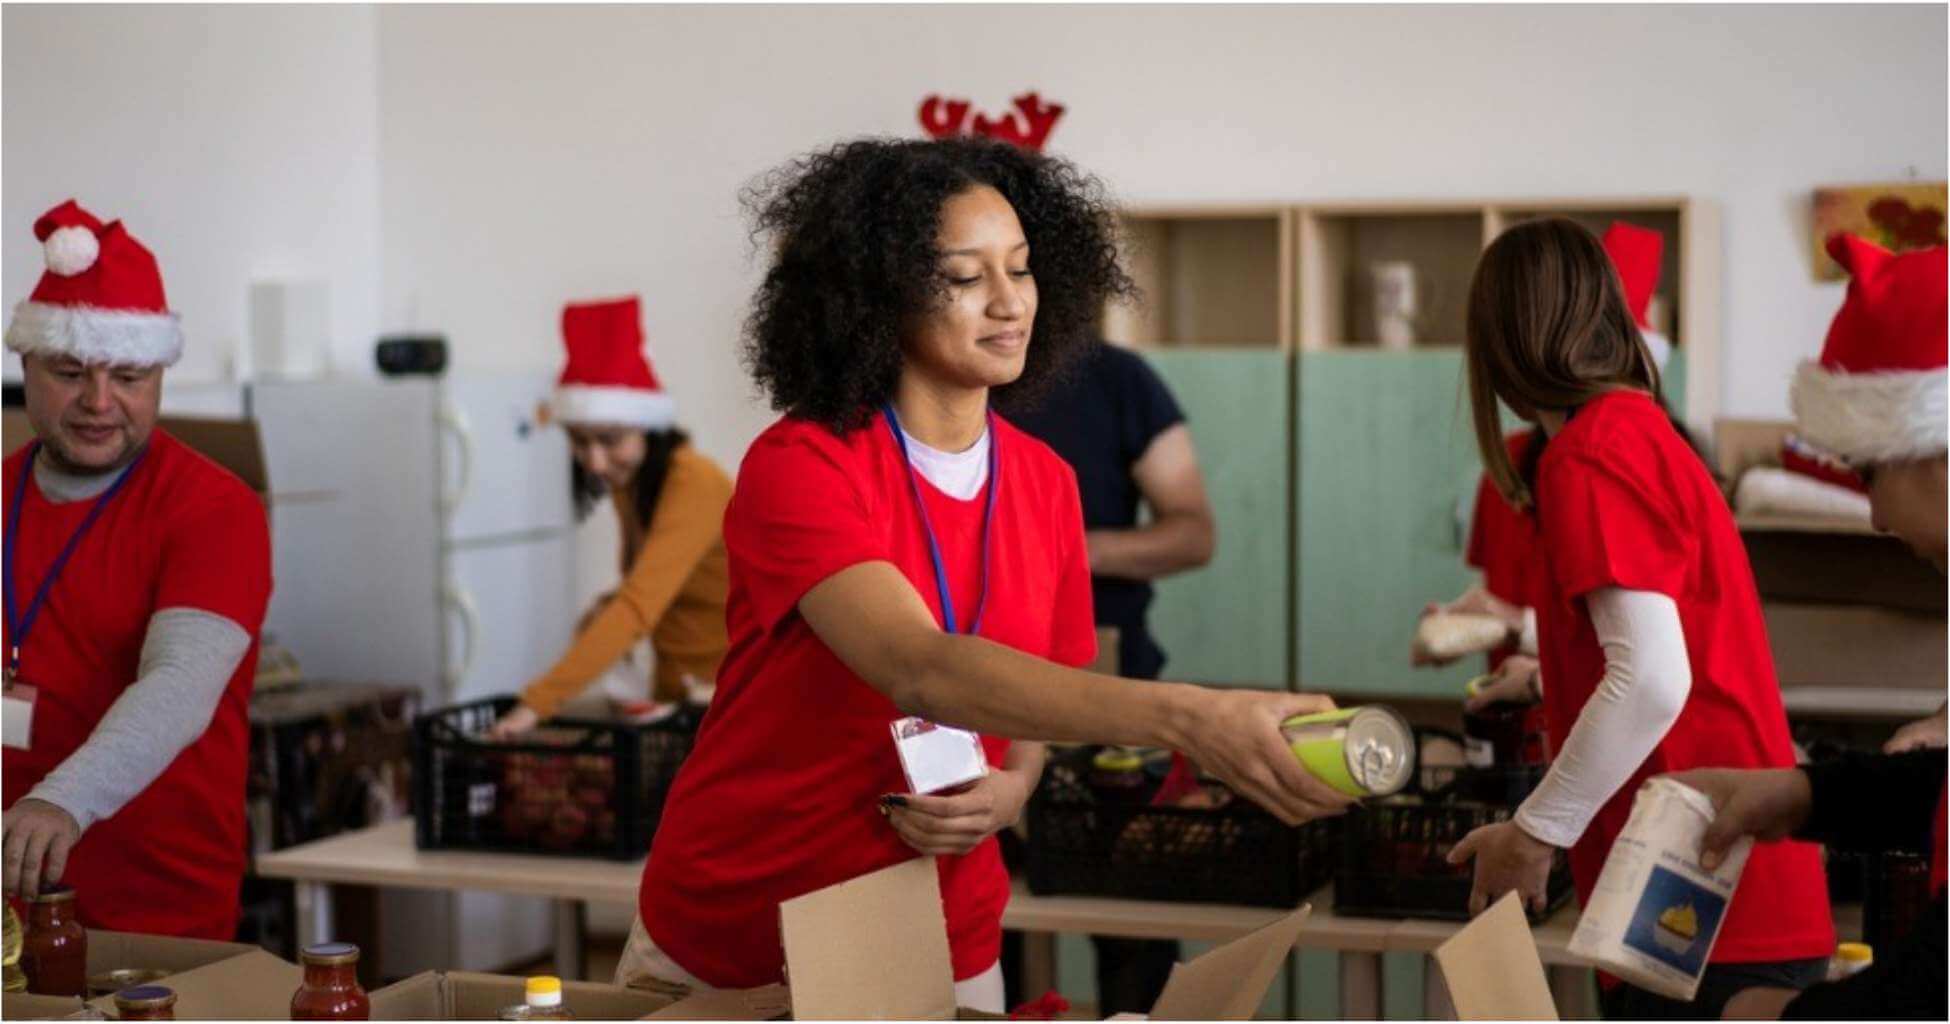 A young woman volunteers by packaging canned goods.